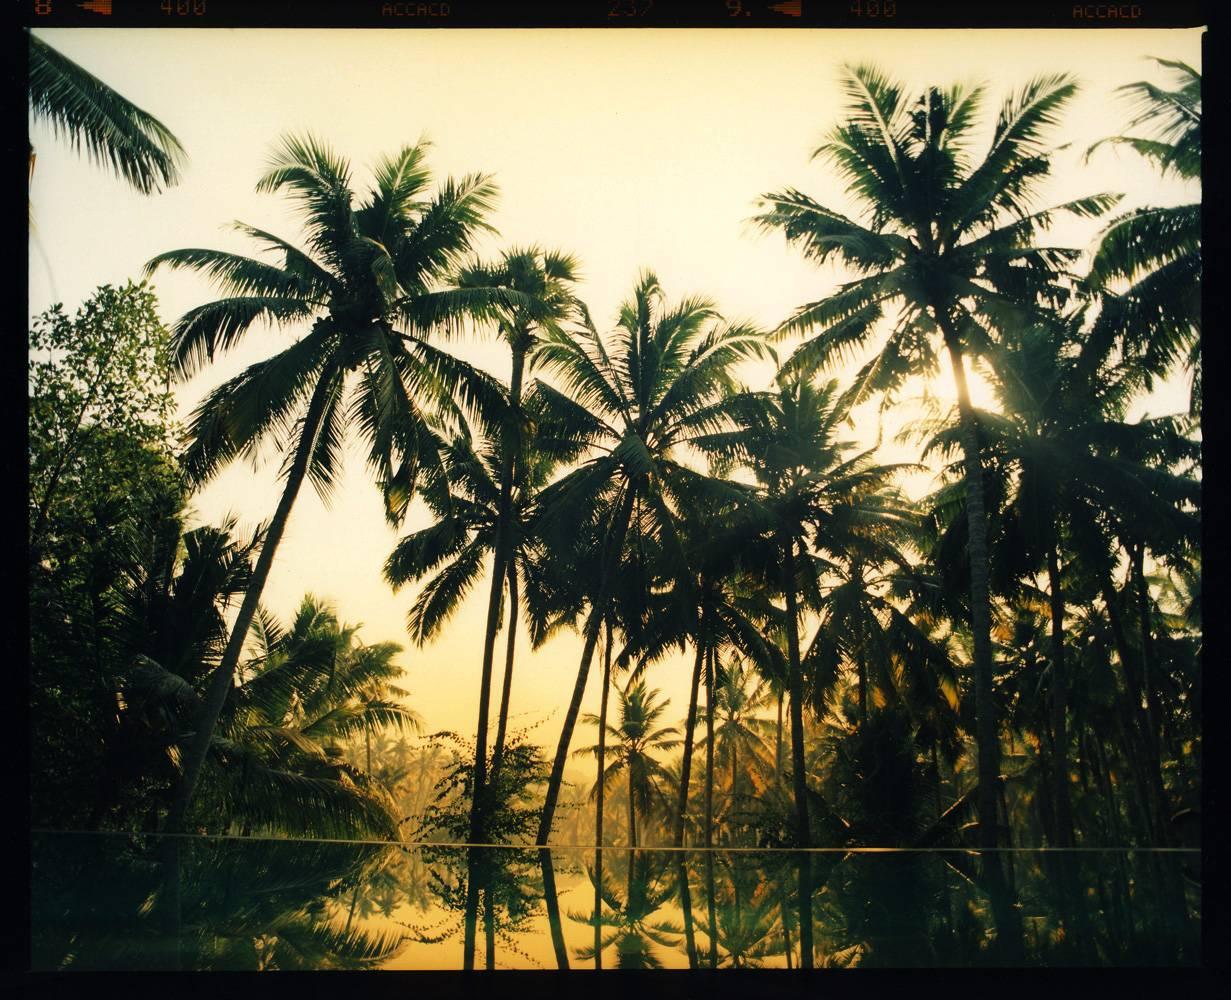 Vetyver Pool, photograph from Richard Heeps India series, The Ambassador's Window.
On a journey through India, a pilgrimage from Kerala in the South, to his Grandfather's birthplace Meerut in the North. Created at sunset in Kerala this palm tree